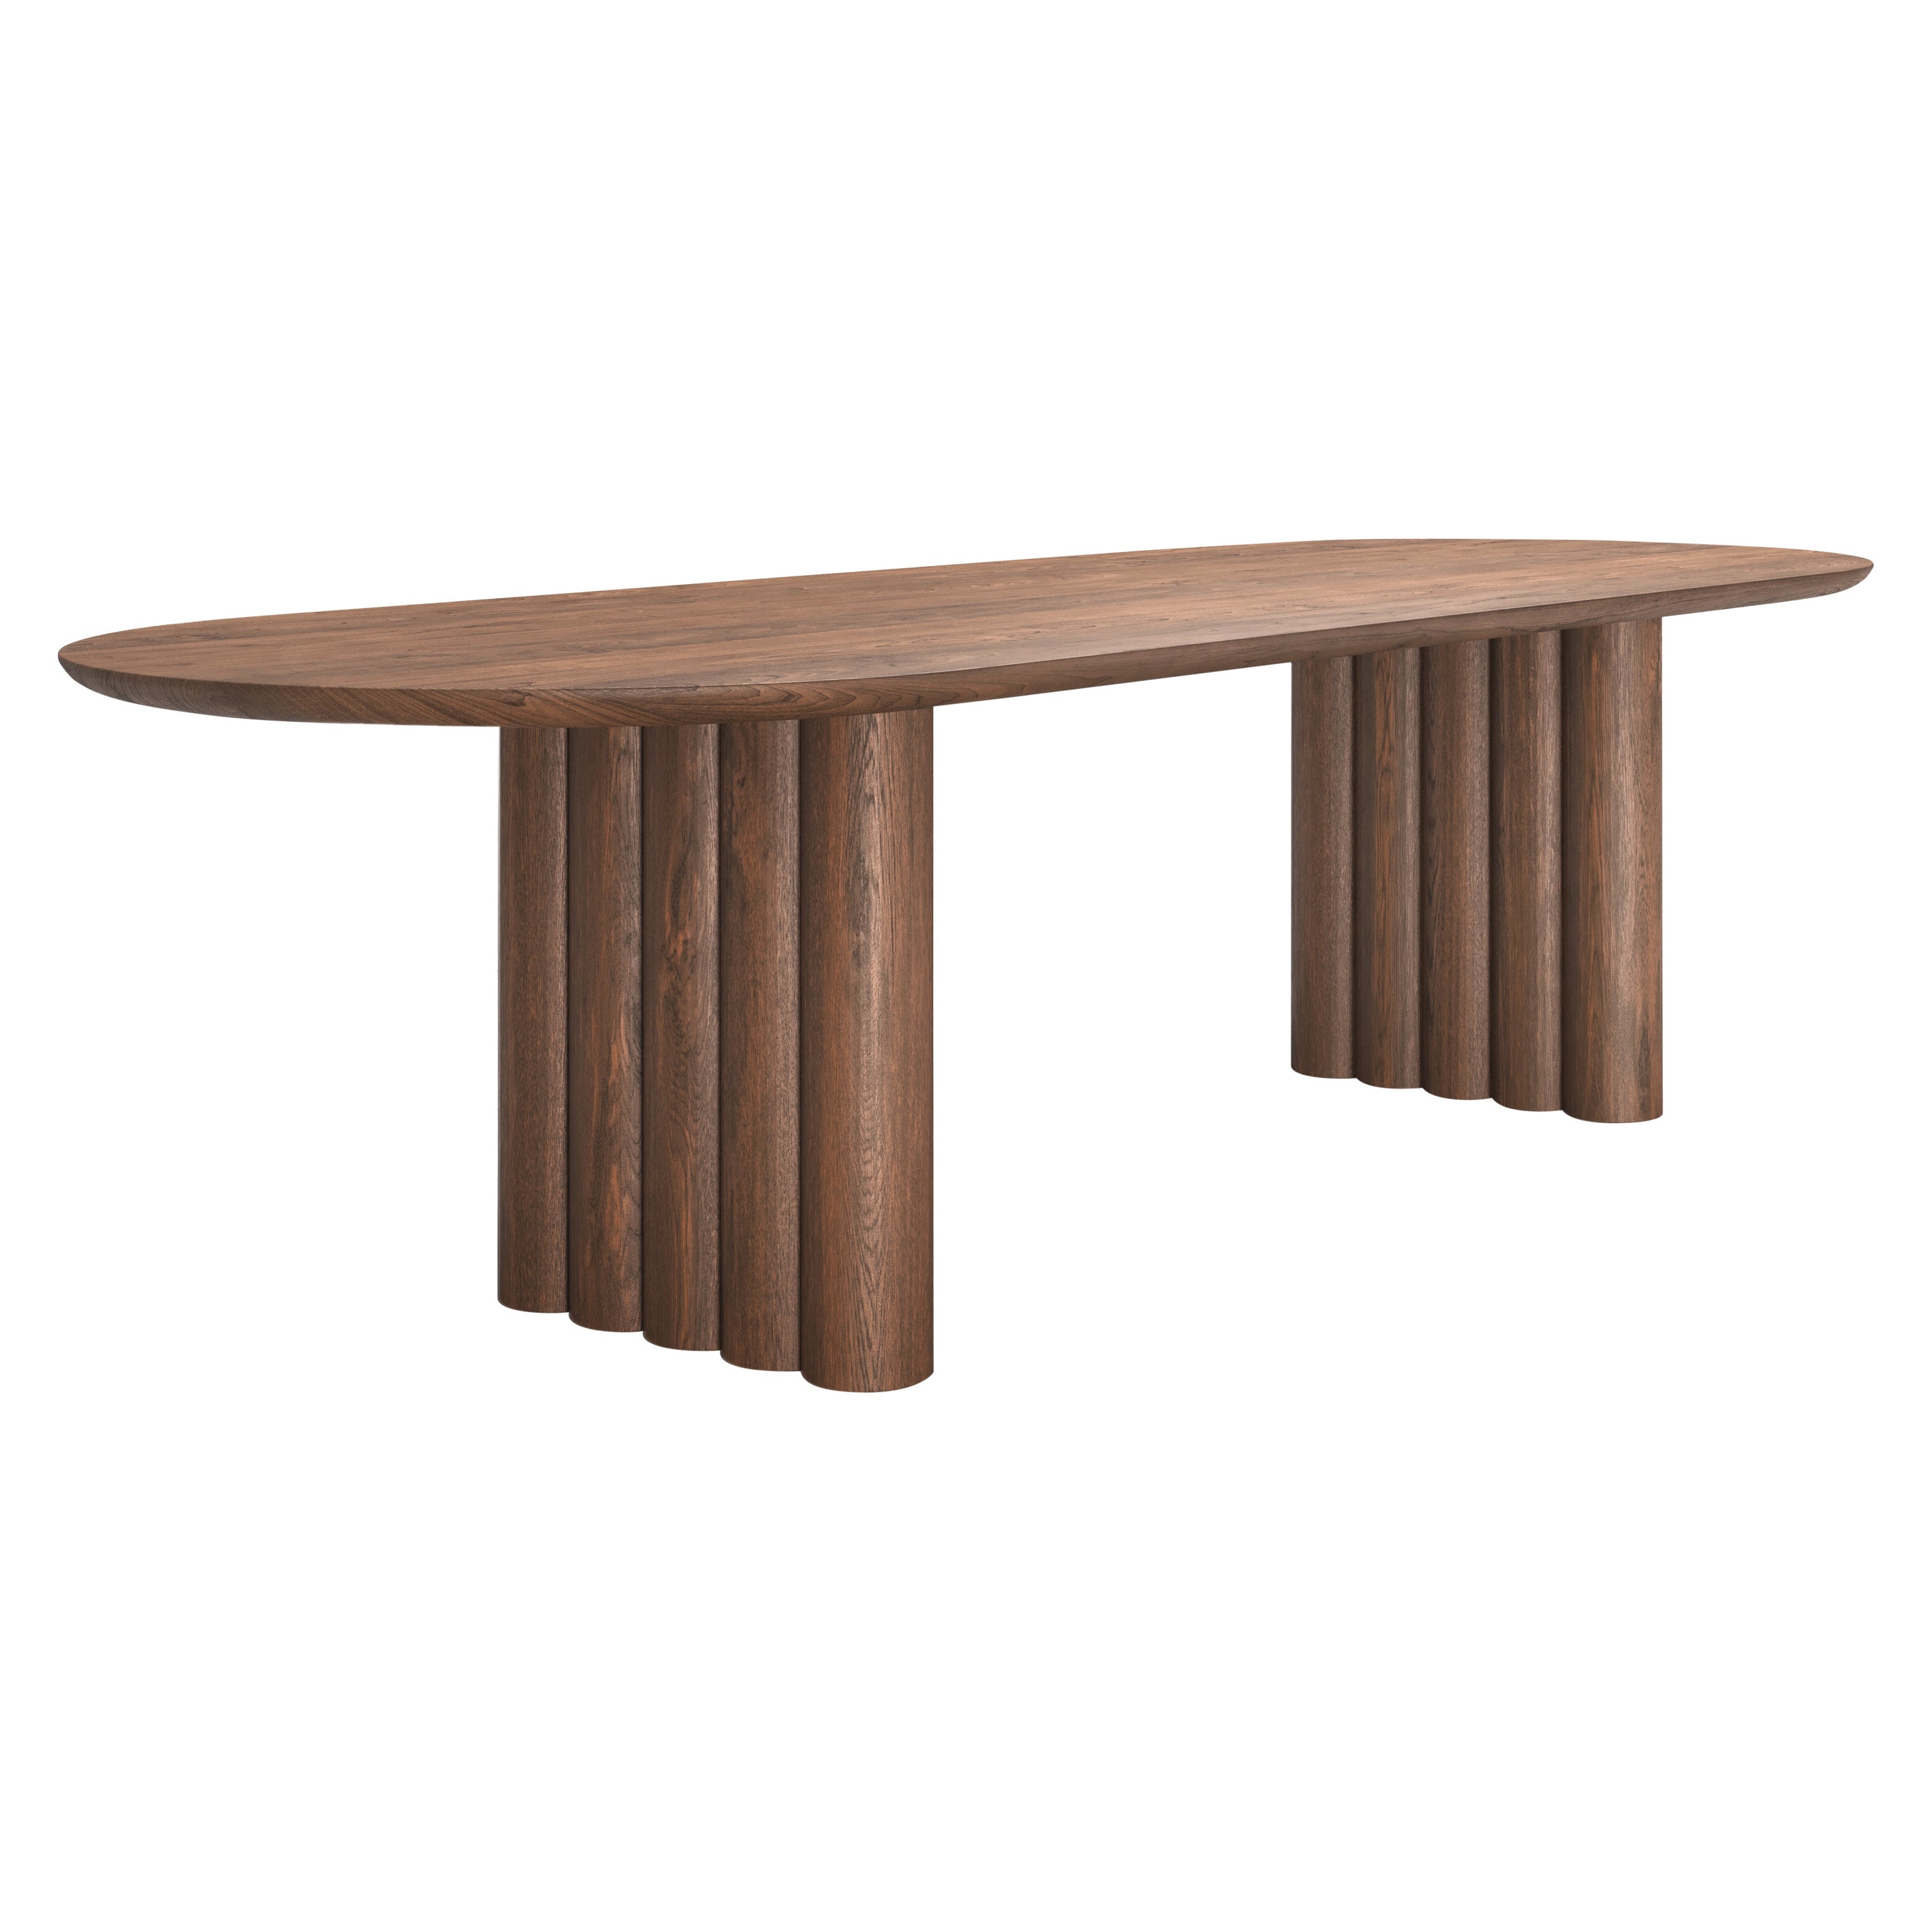 Contemporary Dining Table 'Plush' by Dk3, Smoked Oak or Walnut, 270 For Sale